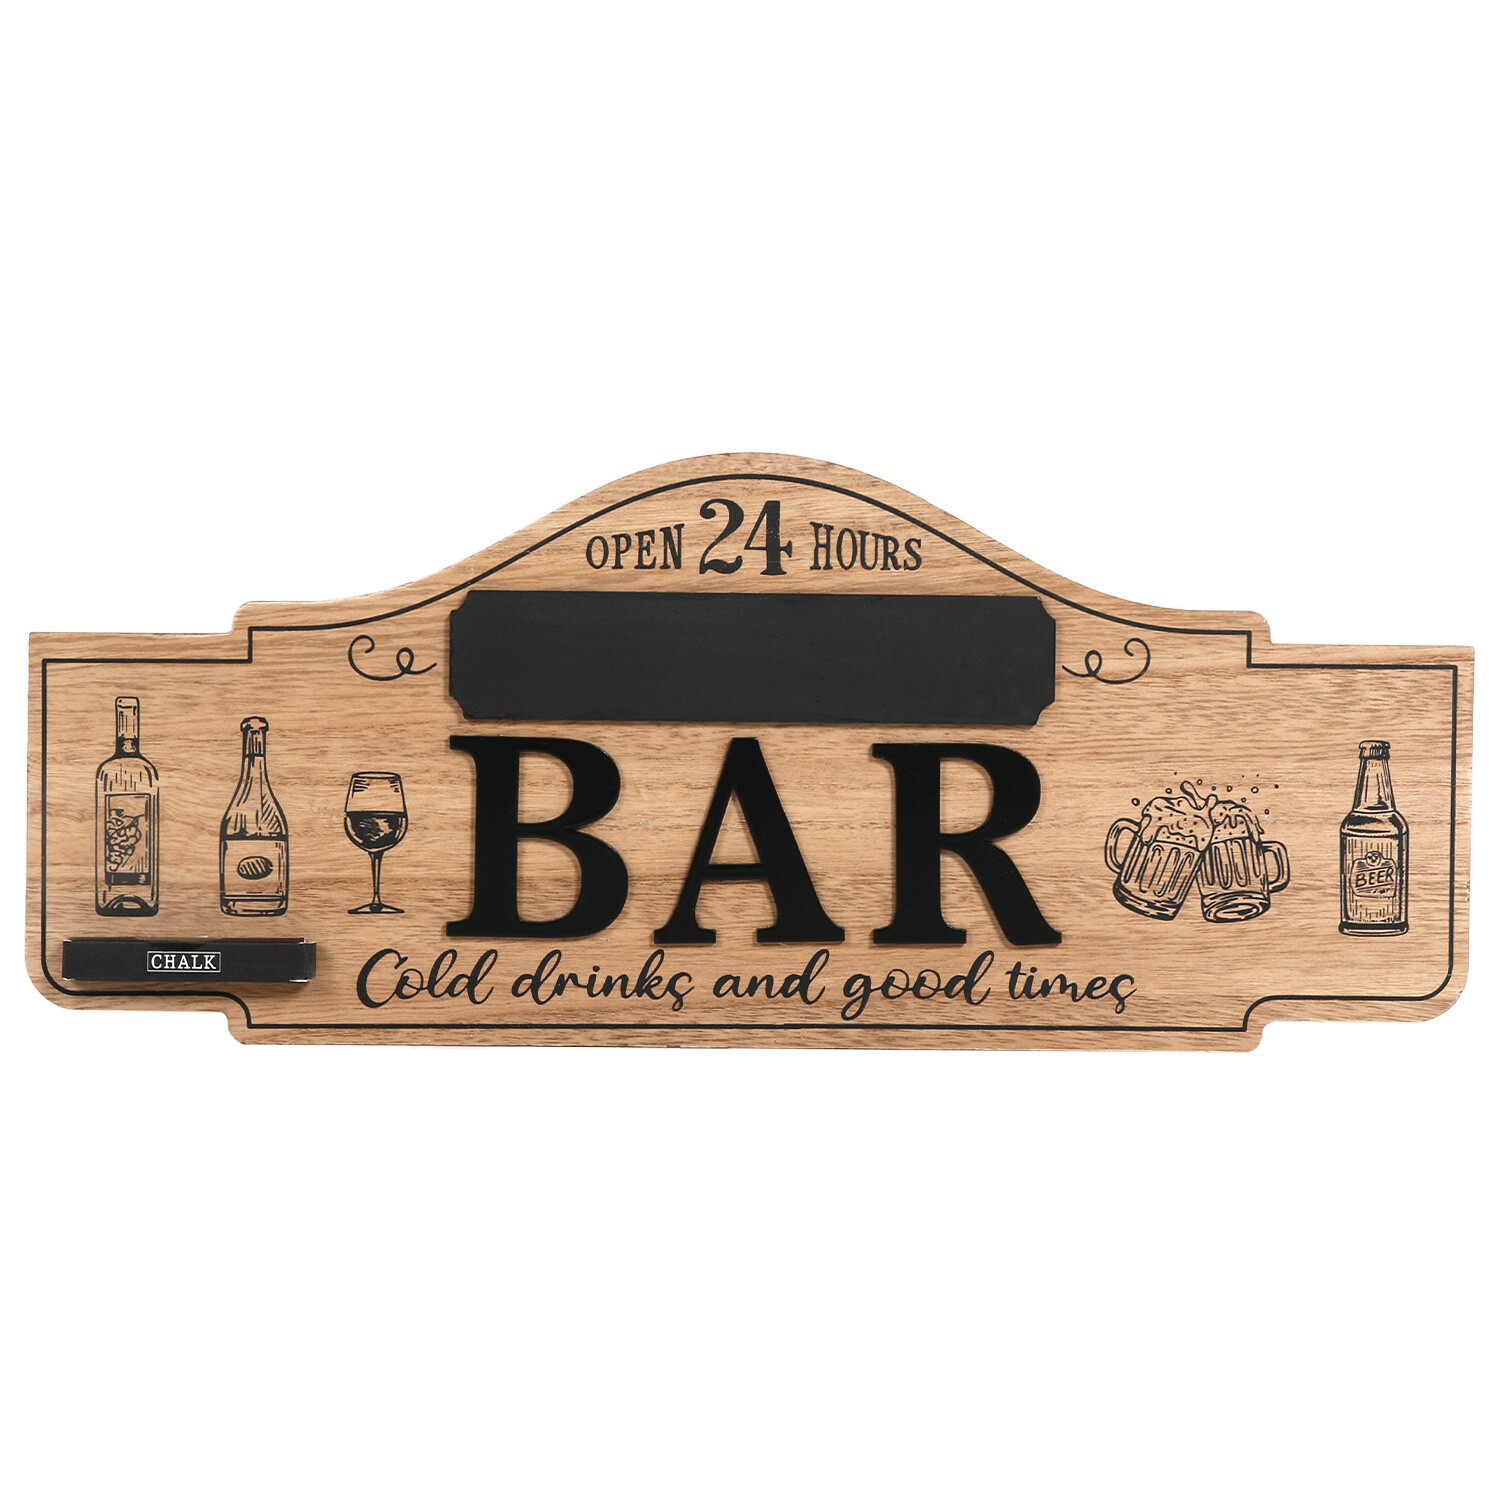 Wood Effect Personalise Bar Wall Sign 48 x 20cm Image